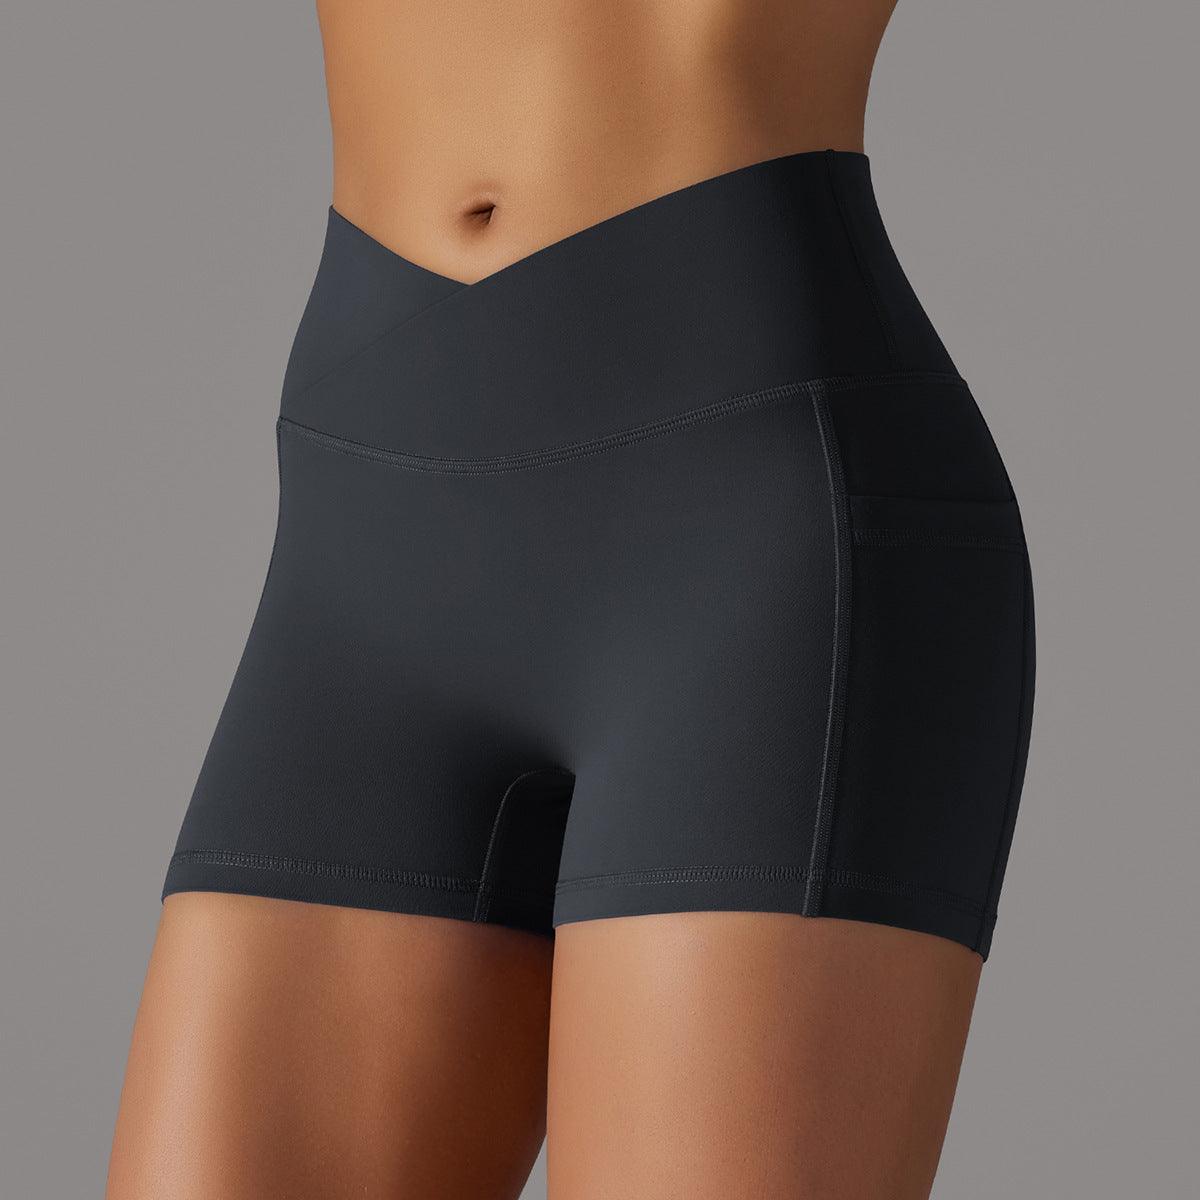 Yoga Shorts With Phone Pocket Design Fitness Sports Pants For Women Clothing - Your-Look